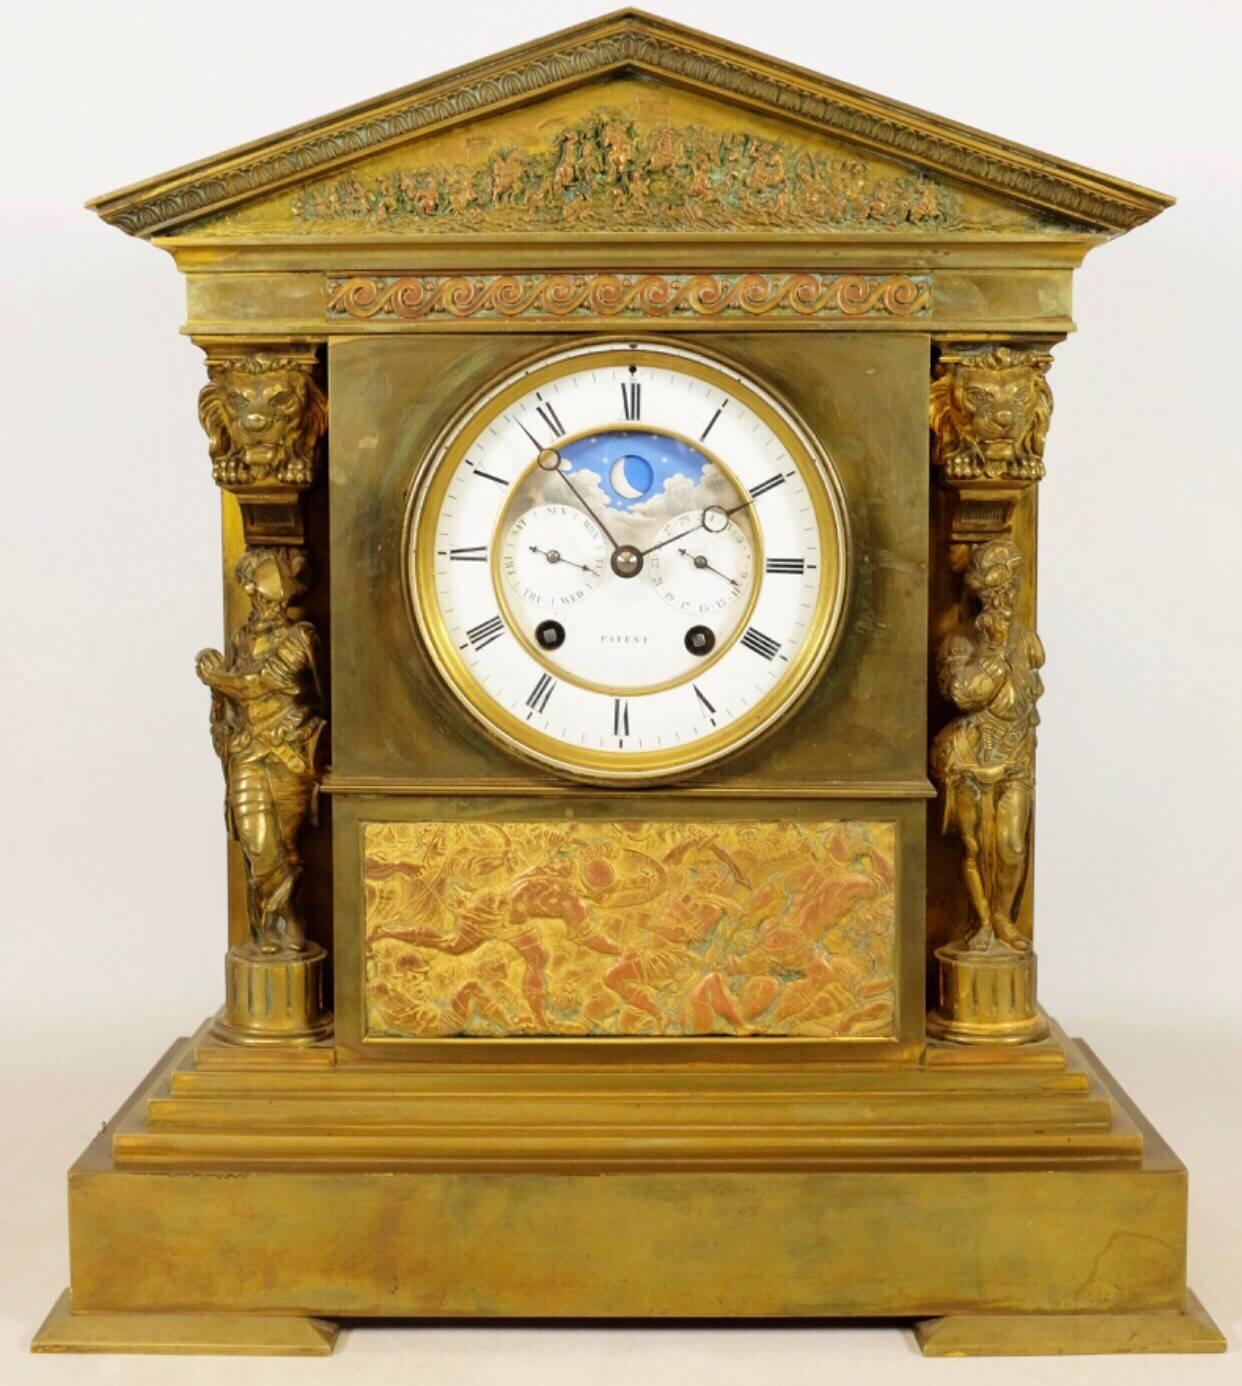 A fine and rare month going neoclassical perpetual calendar clock garniture by the renowned clock-makers, Achilles Brocot and Jean Baptist Delettrez.
Inset with embossed metal friezes, warrior figures with lion mask capitals with a white enamel